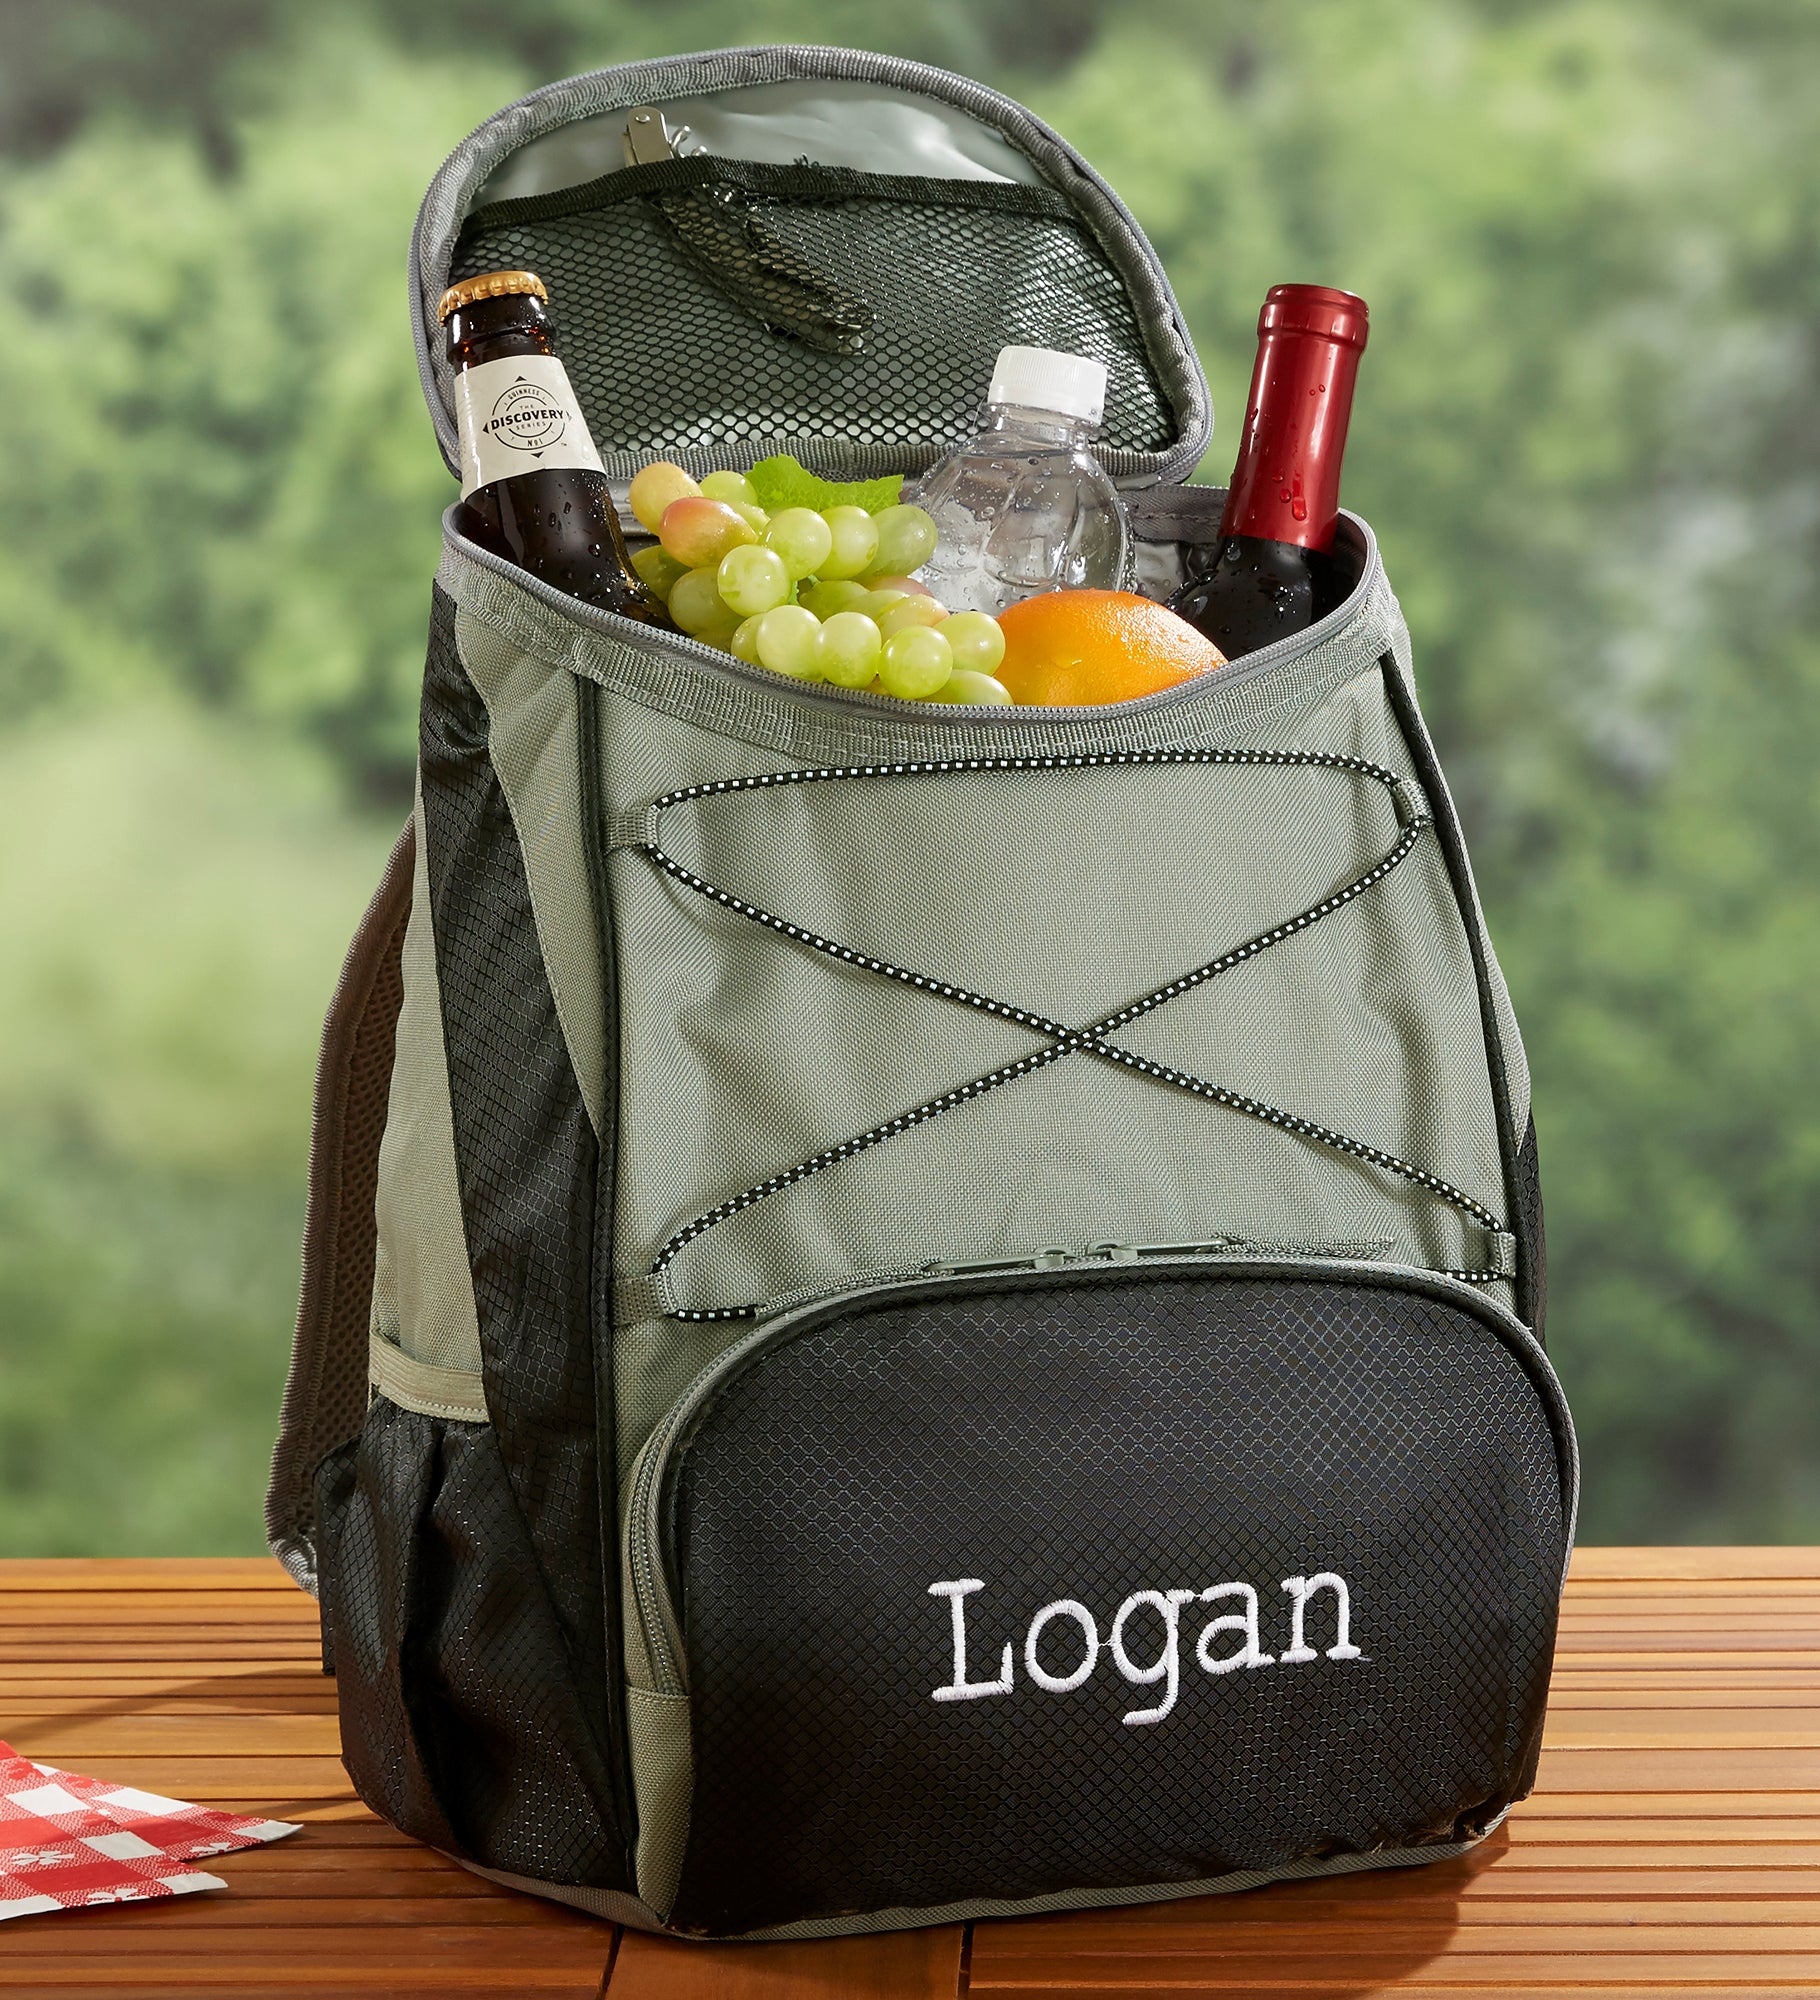 Embroidered Outdoor Cooler Backpack